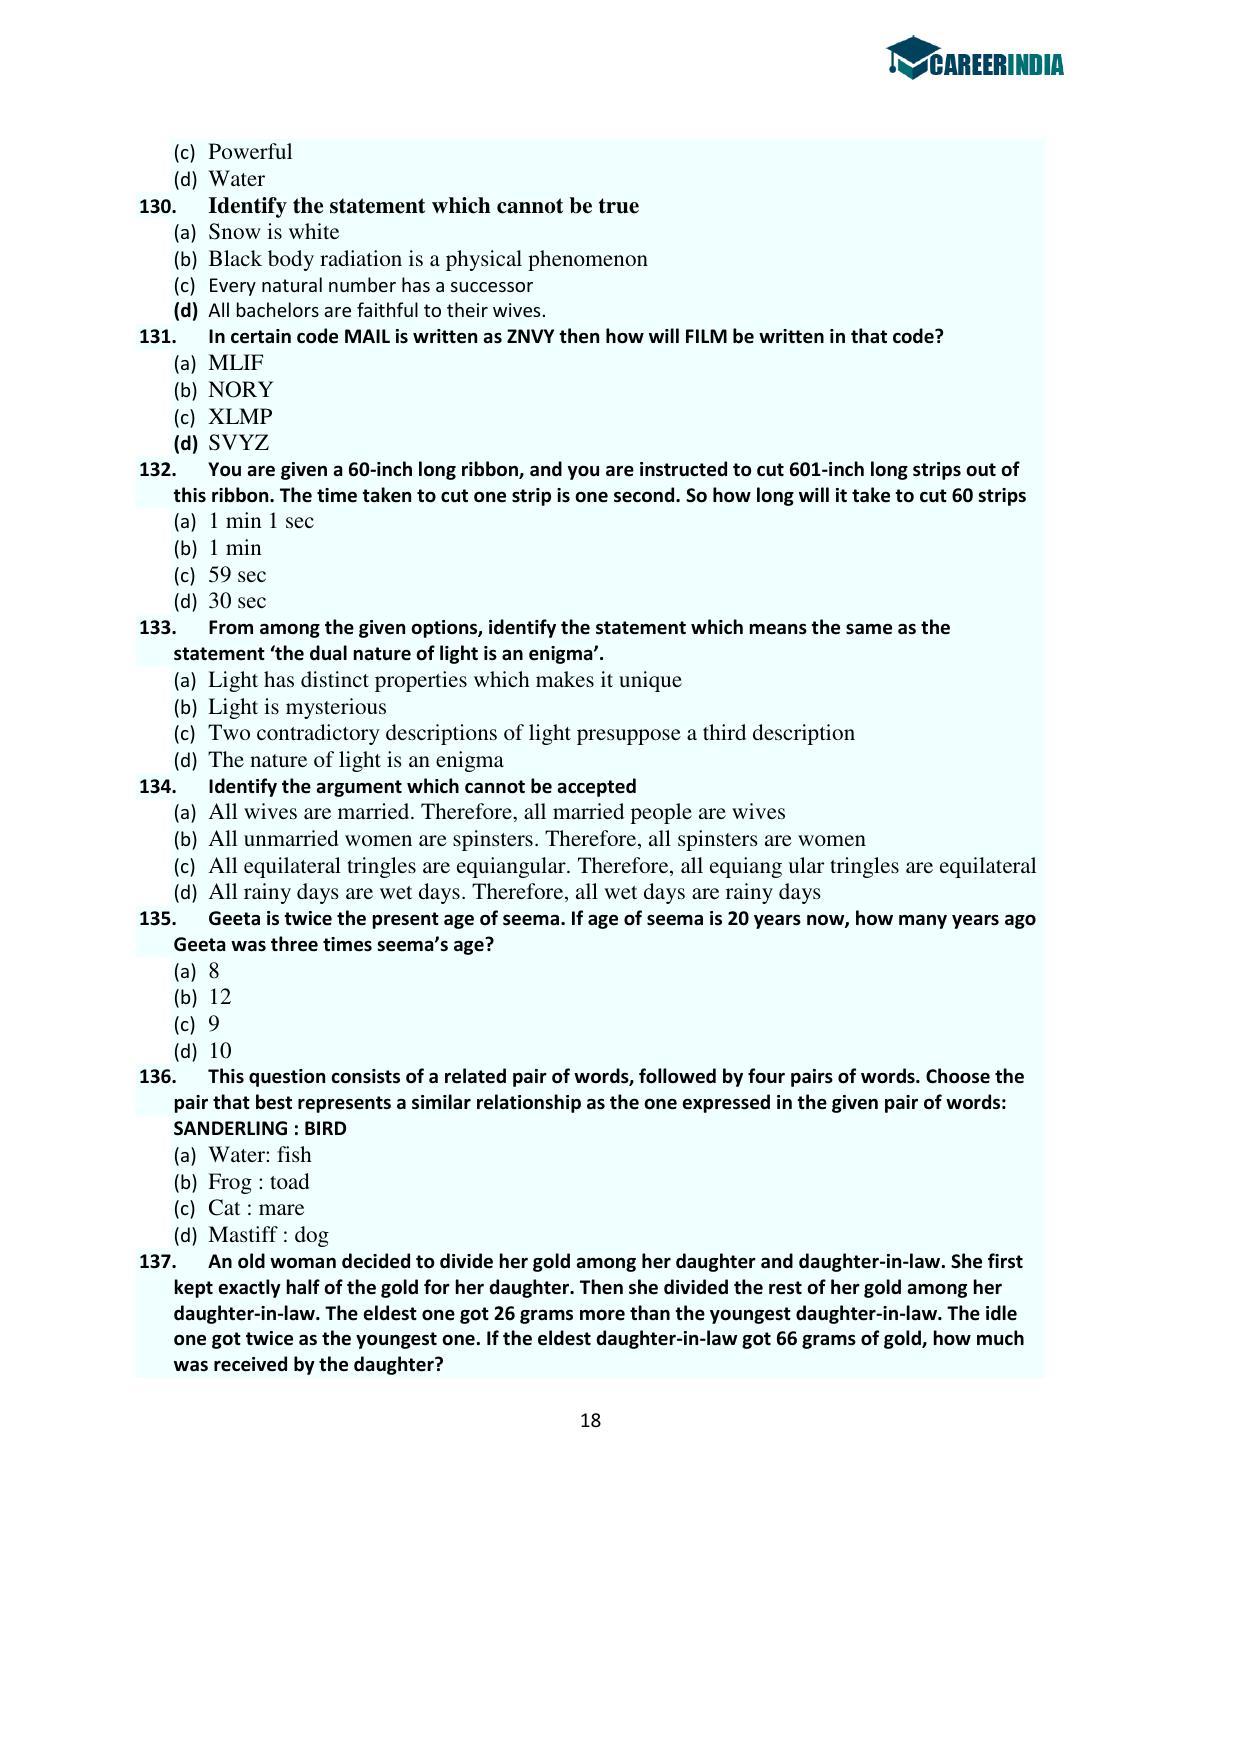 CLAT 2016 UG Question Paper with Answer Key - Page 18